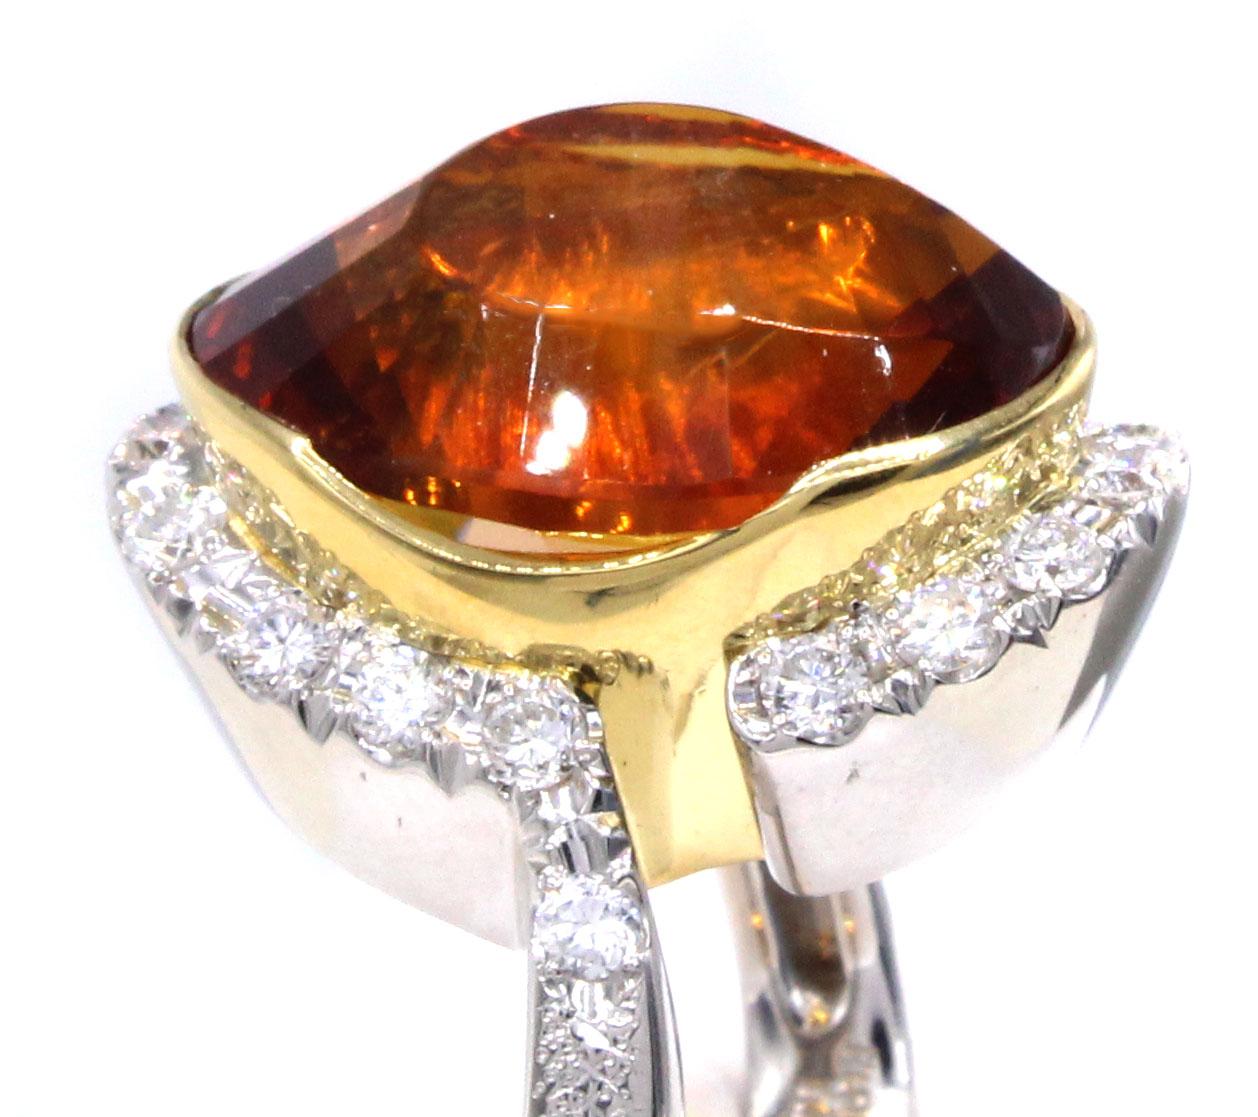 Uniquely designed and masterfully handcrafted this bold 1970s creation features an intense orange Madeira Citrine weighing 16.72 carats. The abstract cut of this gemstone reminds one of the shape of a volcano or mountain, with a partially smooth